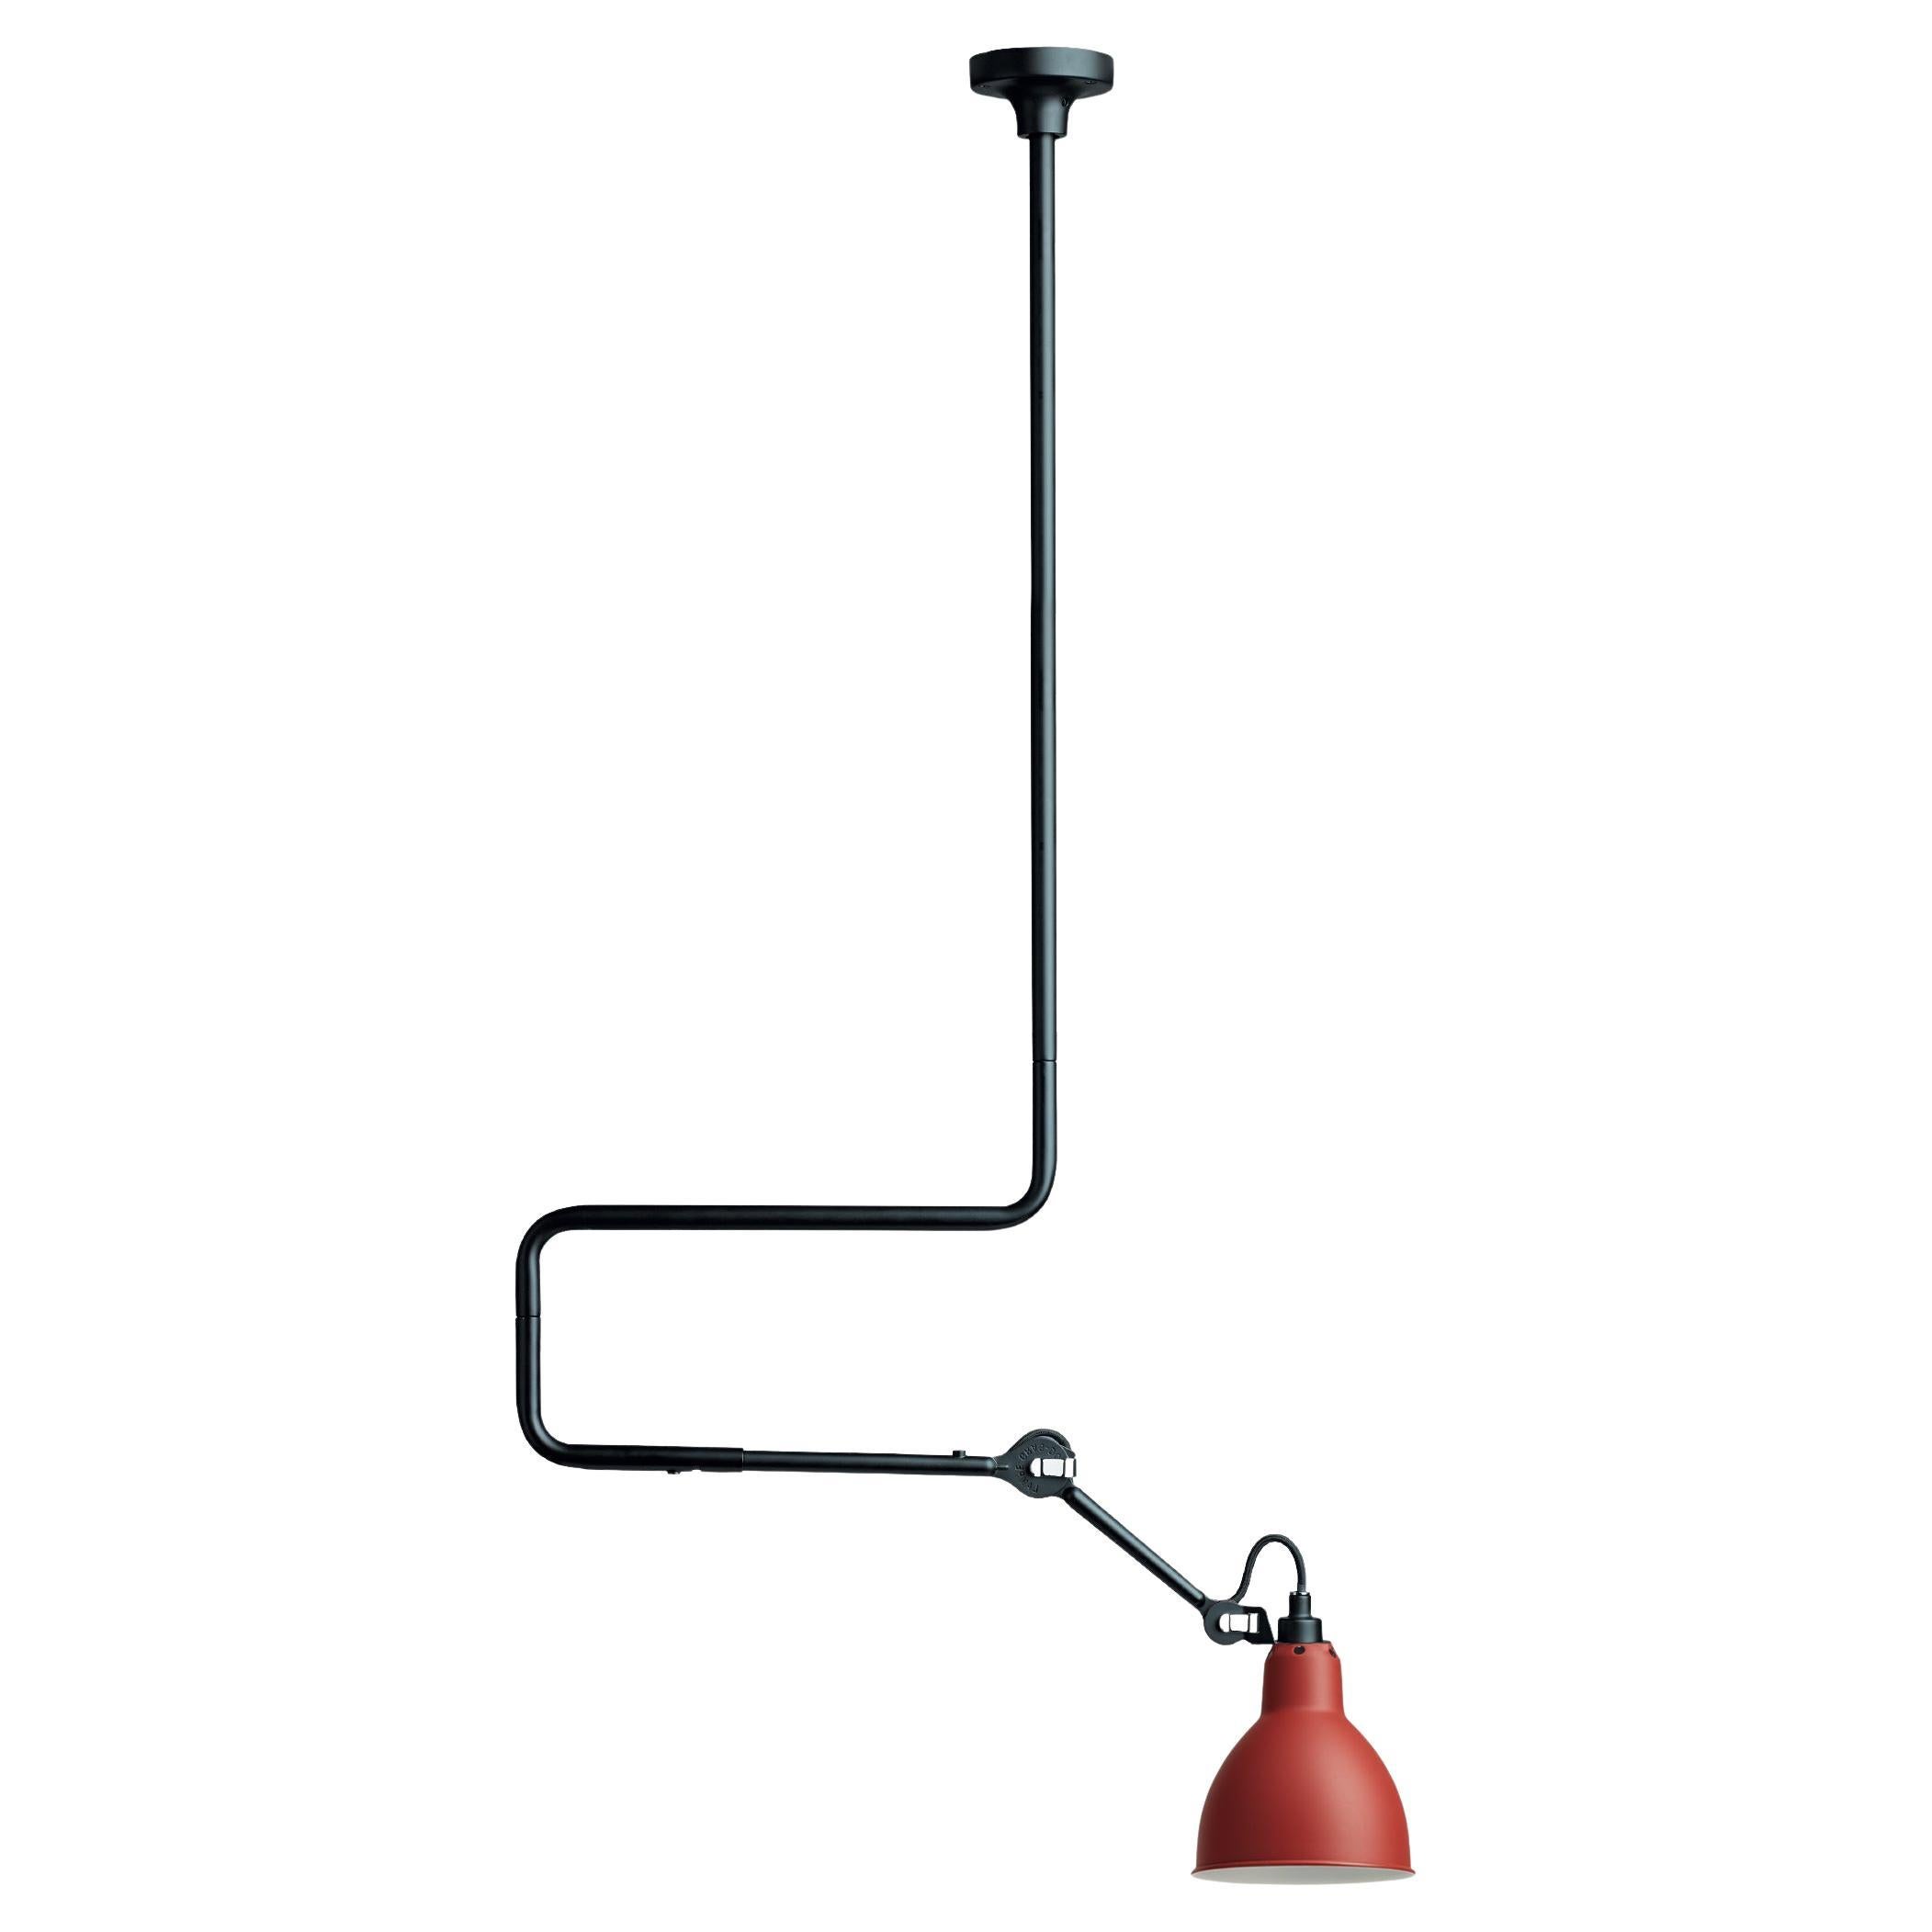 DCW Editions La Lampe Gras N°312 Pendant Lamp w/Extension in Red Shade For Sale